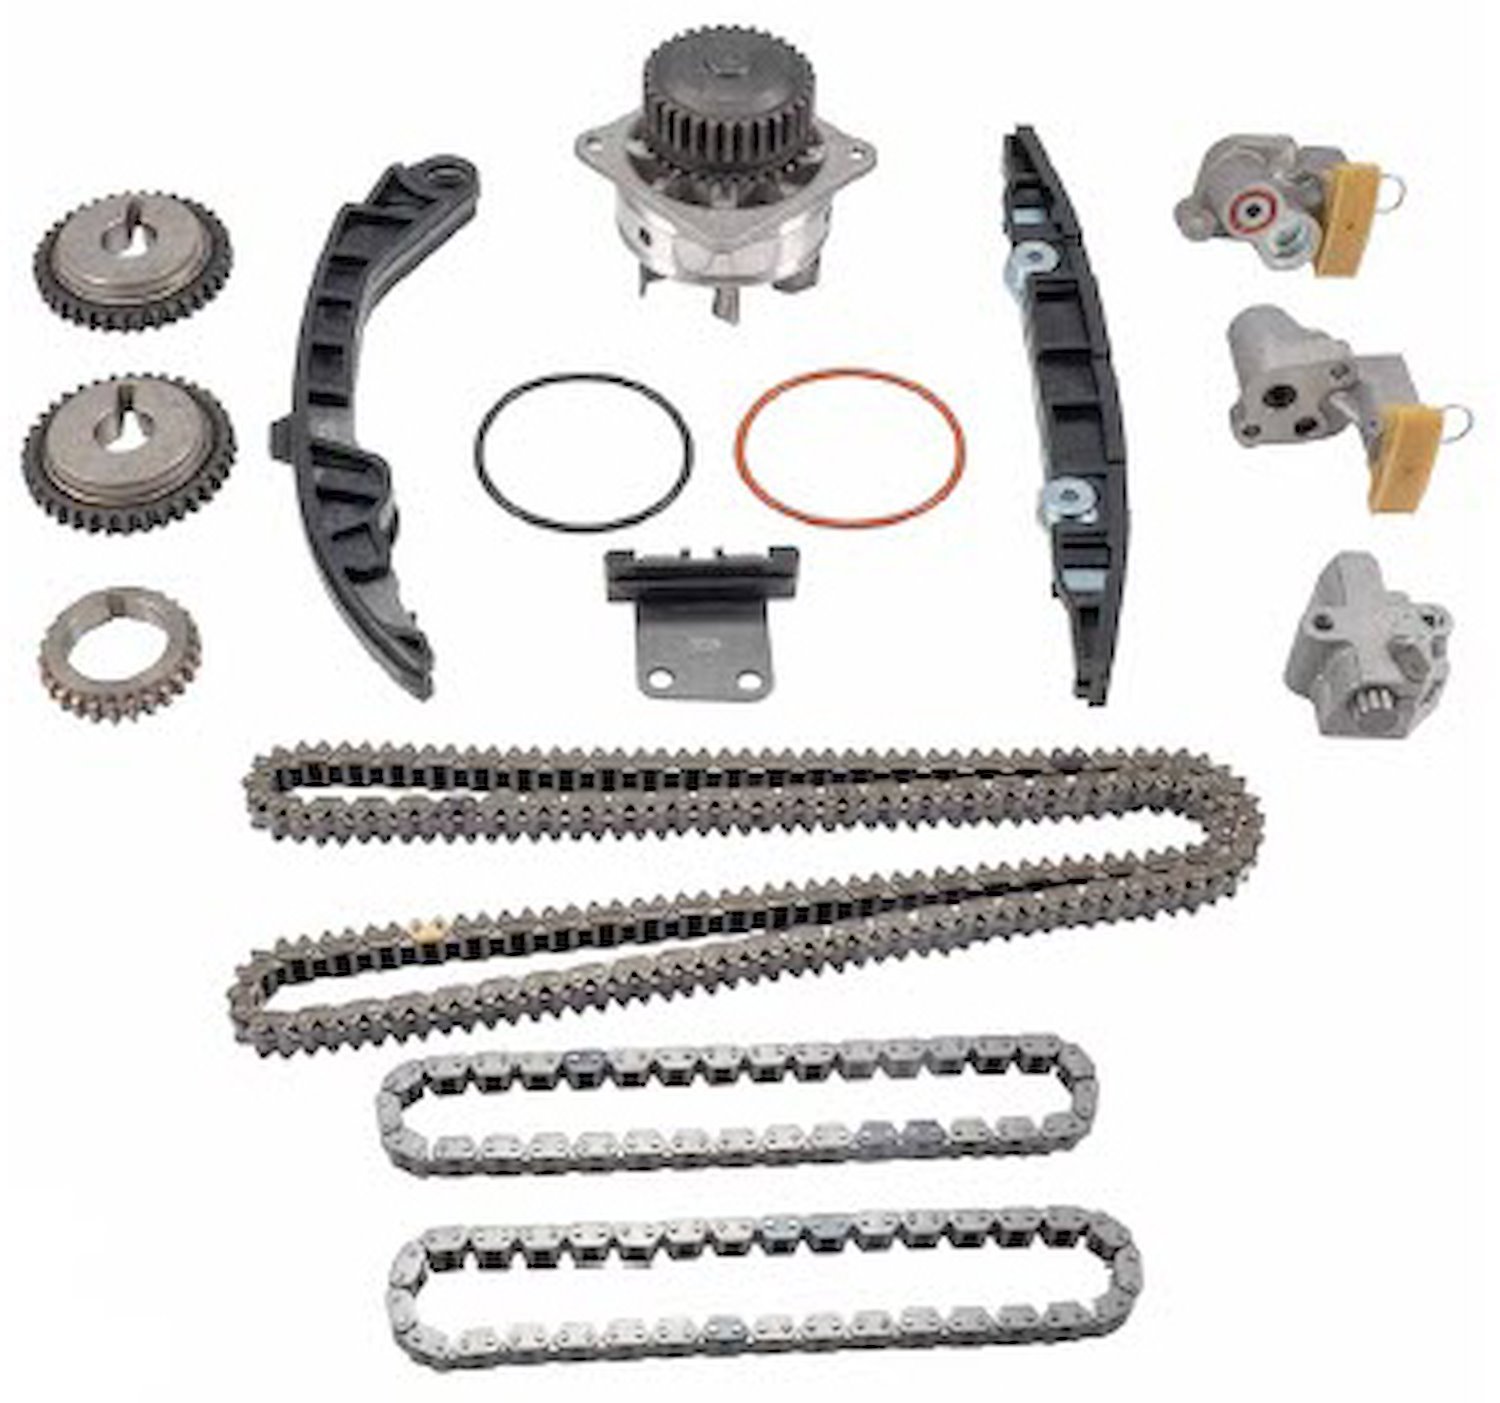 Engine Timing Chain Set and Water Pump Kit for 2007-2008 Fits Infiniti FX35/G35/M35 3.5L V6 DOHC (VQ35DE)